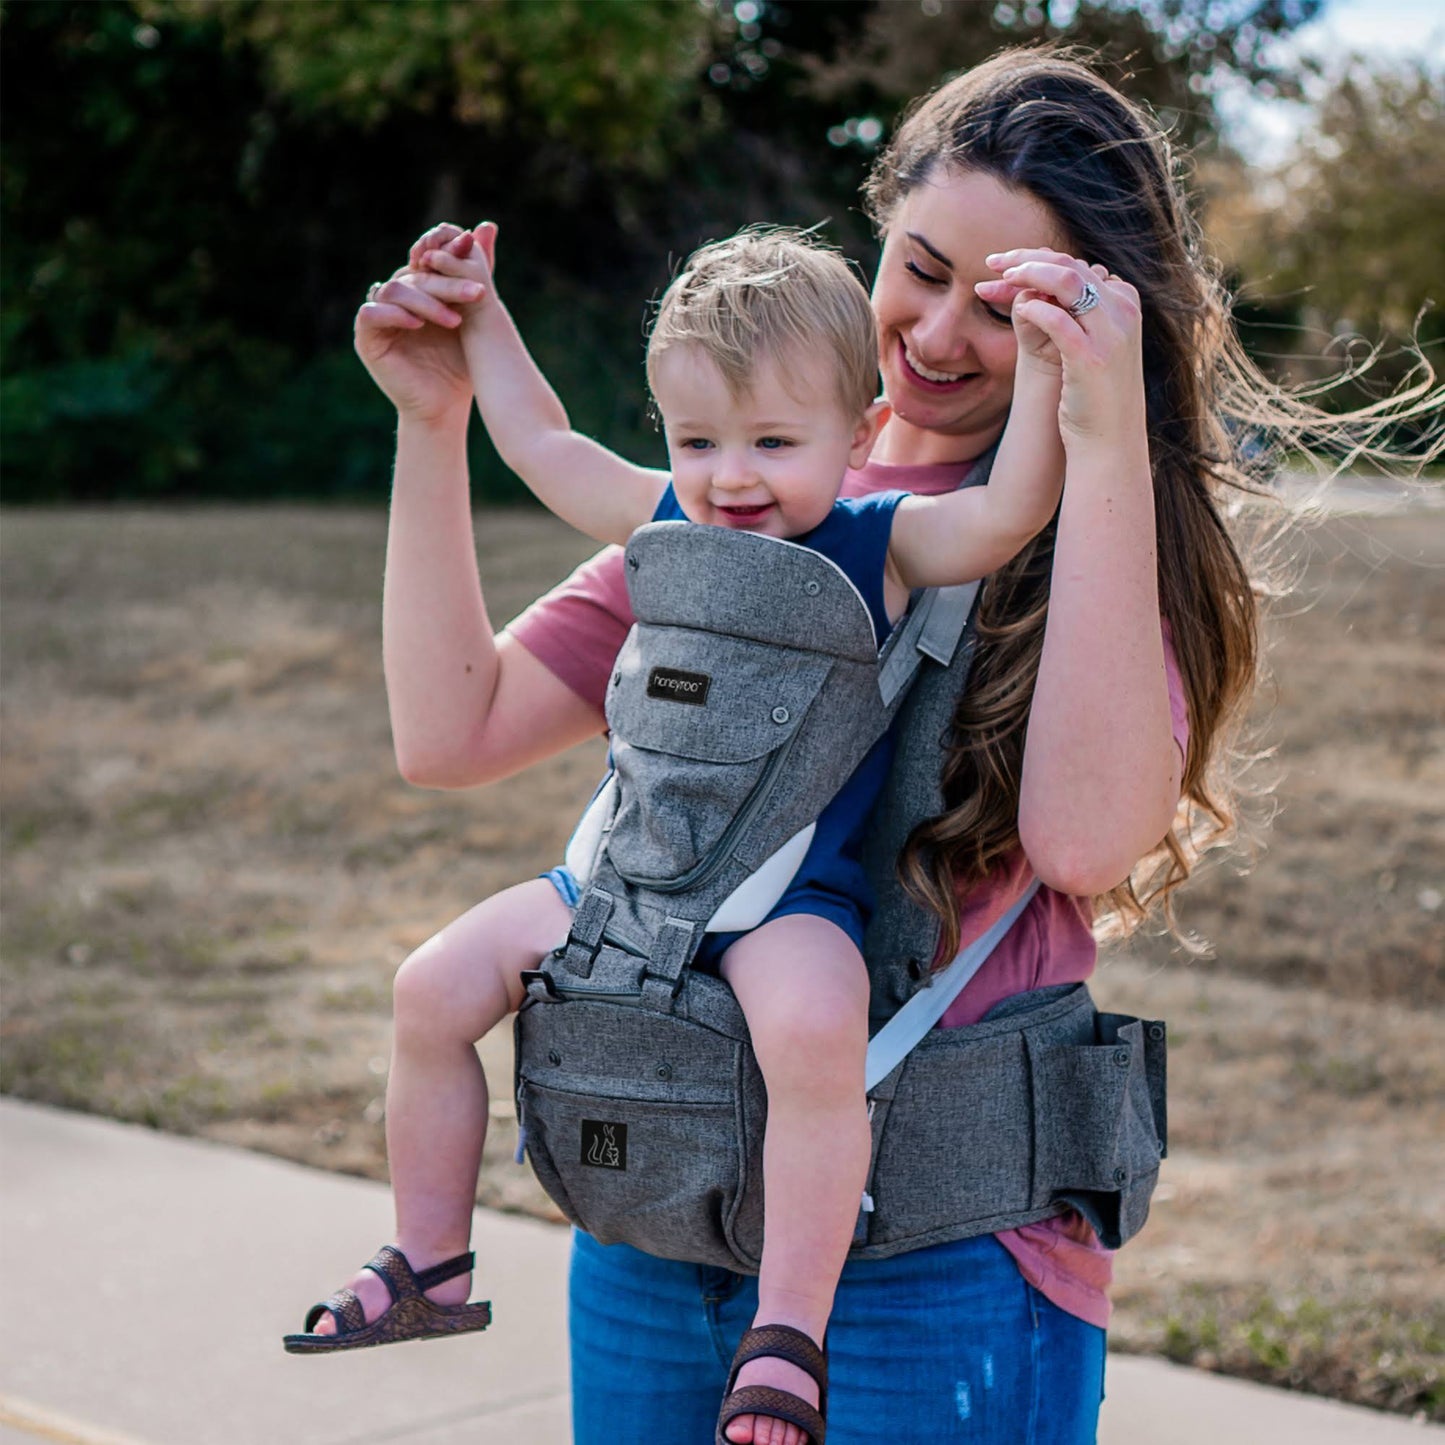 Joey Classic, Best Rated Ergonomic 3d Hip Seat Baby Carrier, Light Weight And Breathable, 6 In 1 Position, 3-36 Months, Front And Back Carry